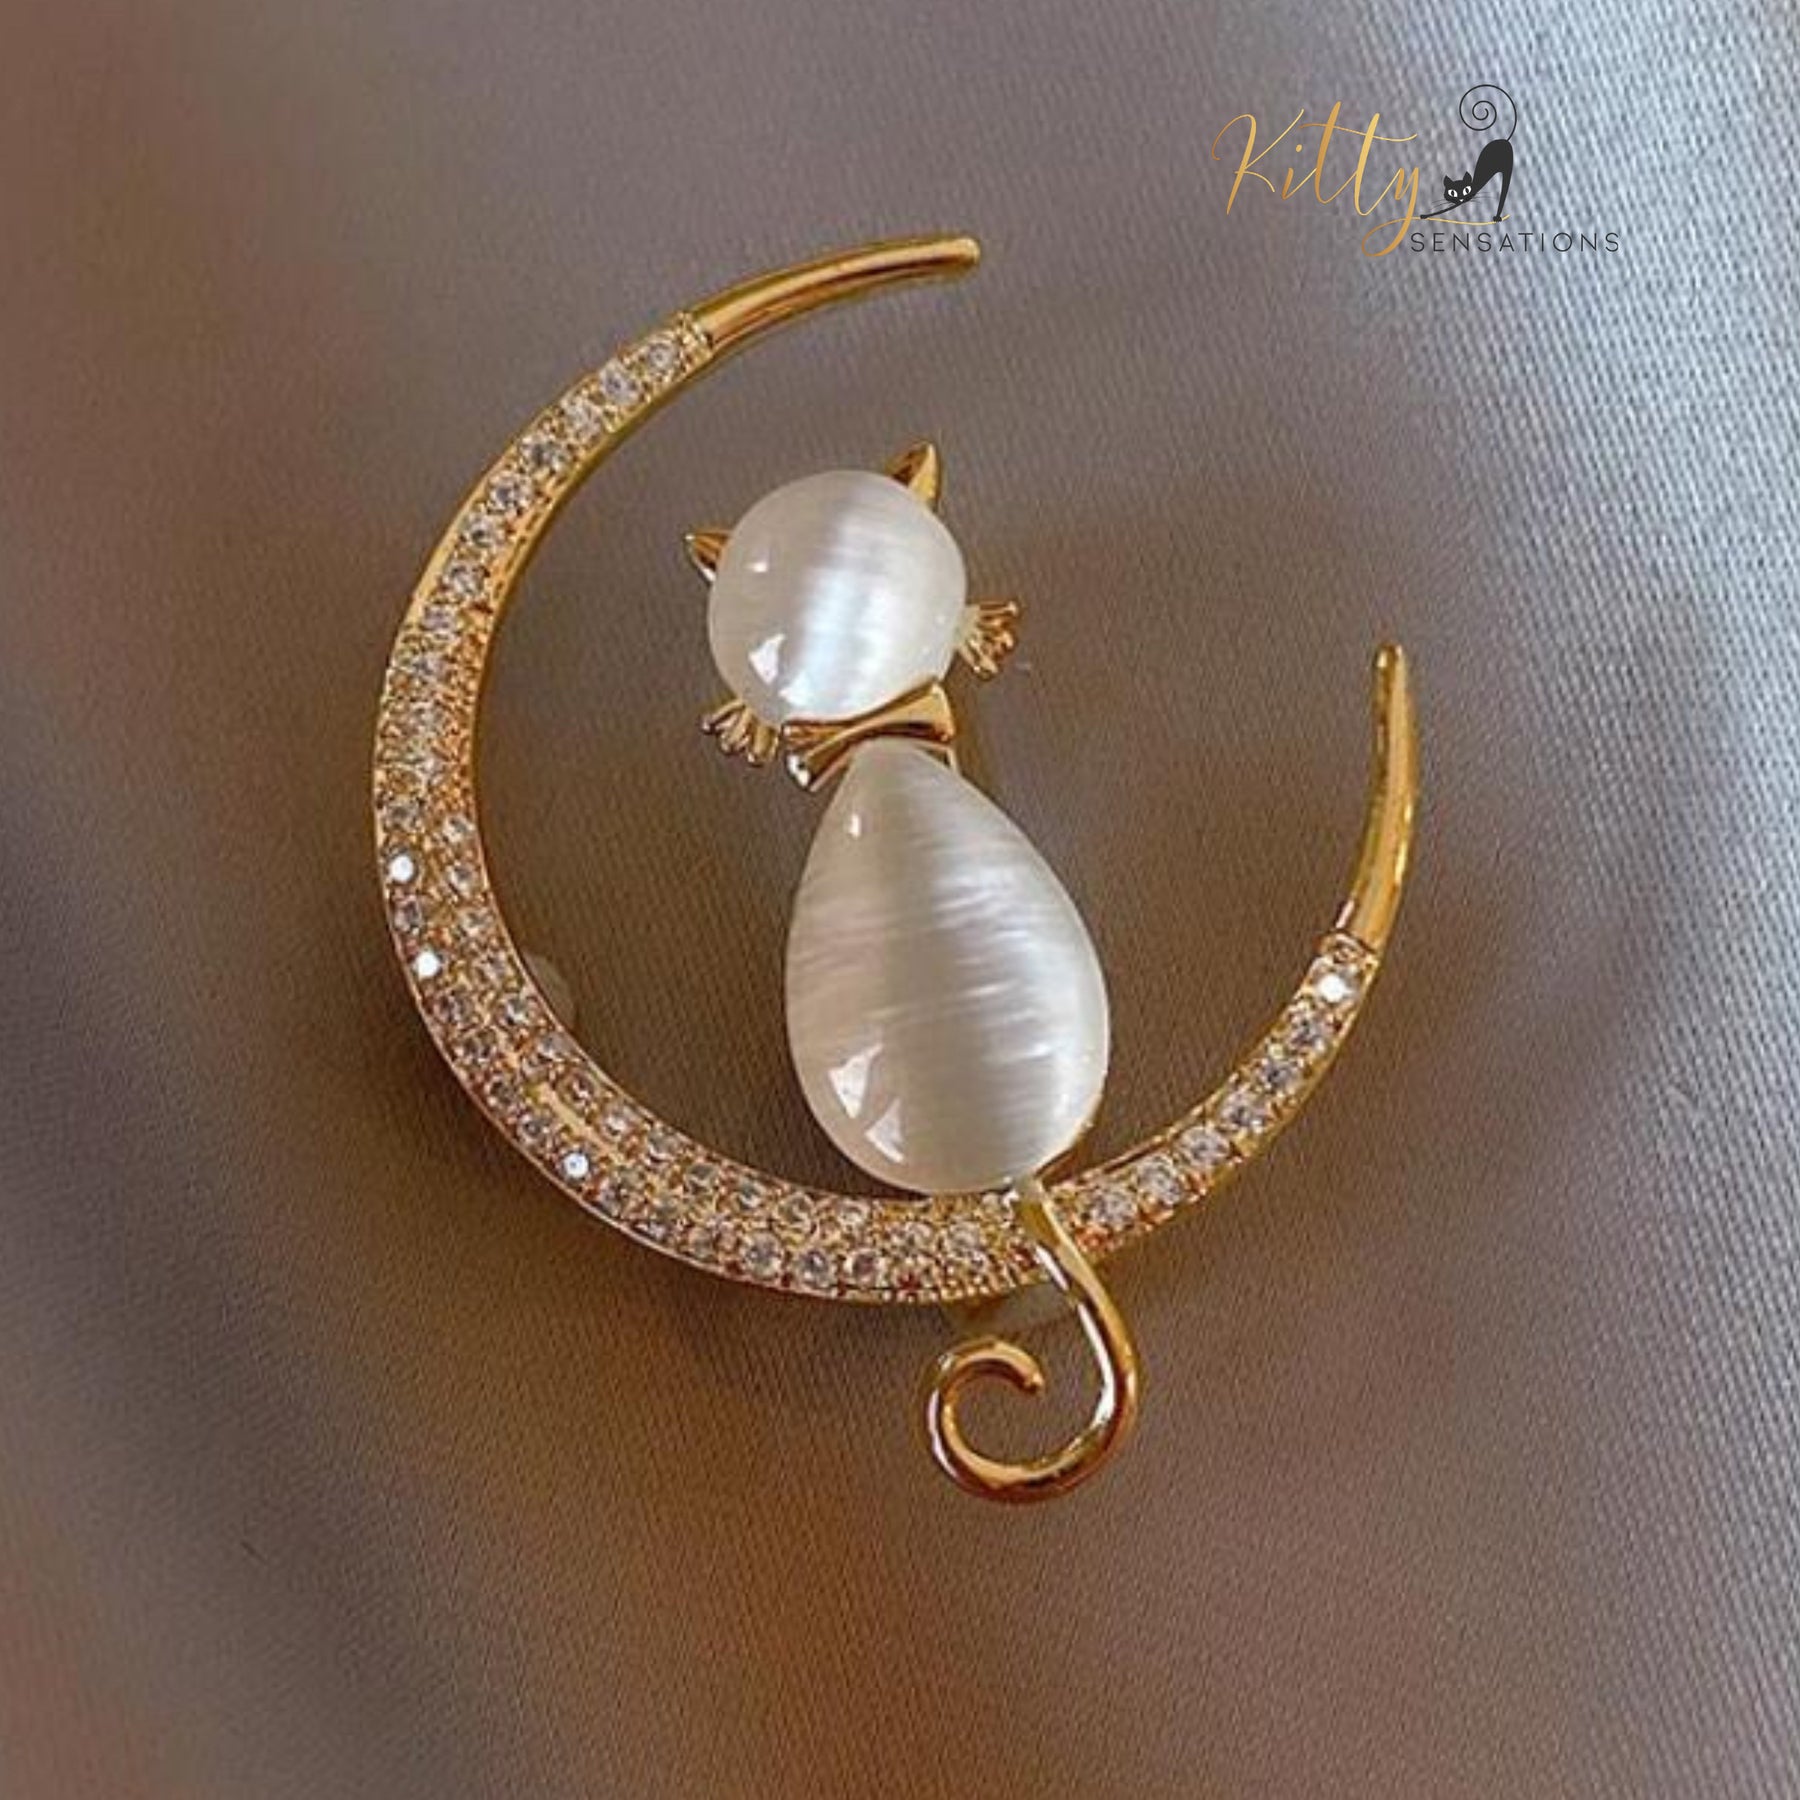 Moon Kitty Brooch in Natural Opal and Cubic Zirconia